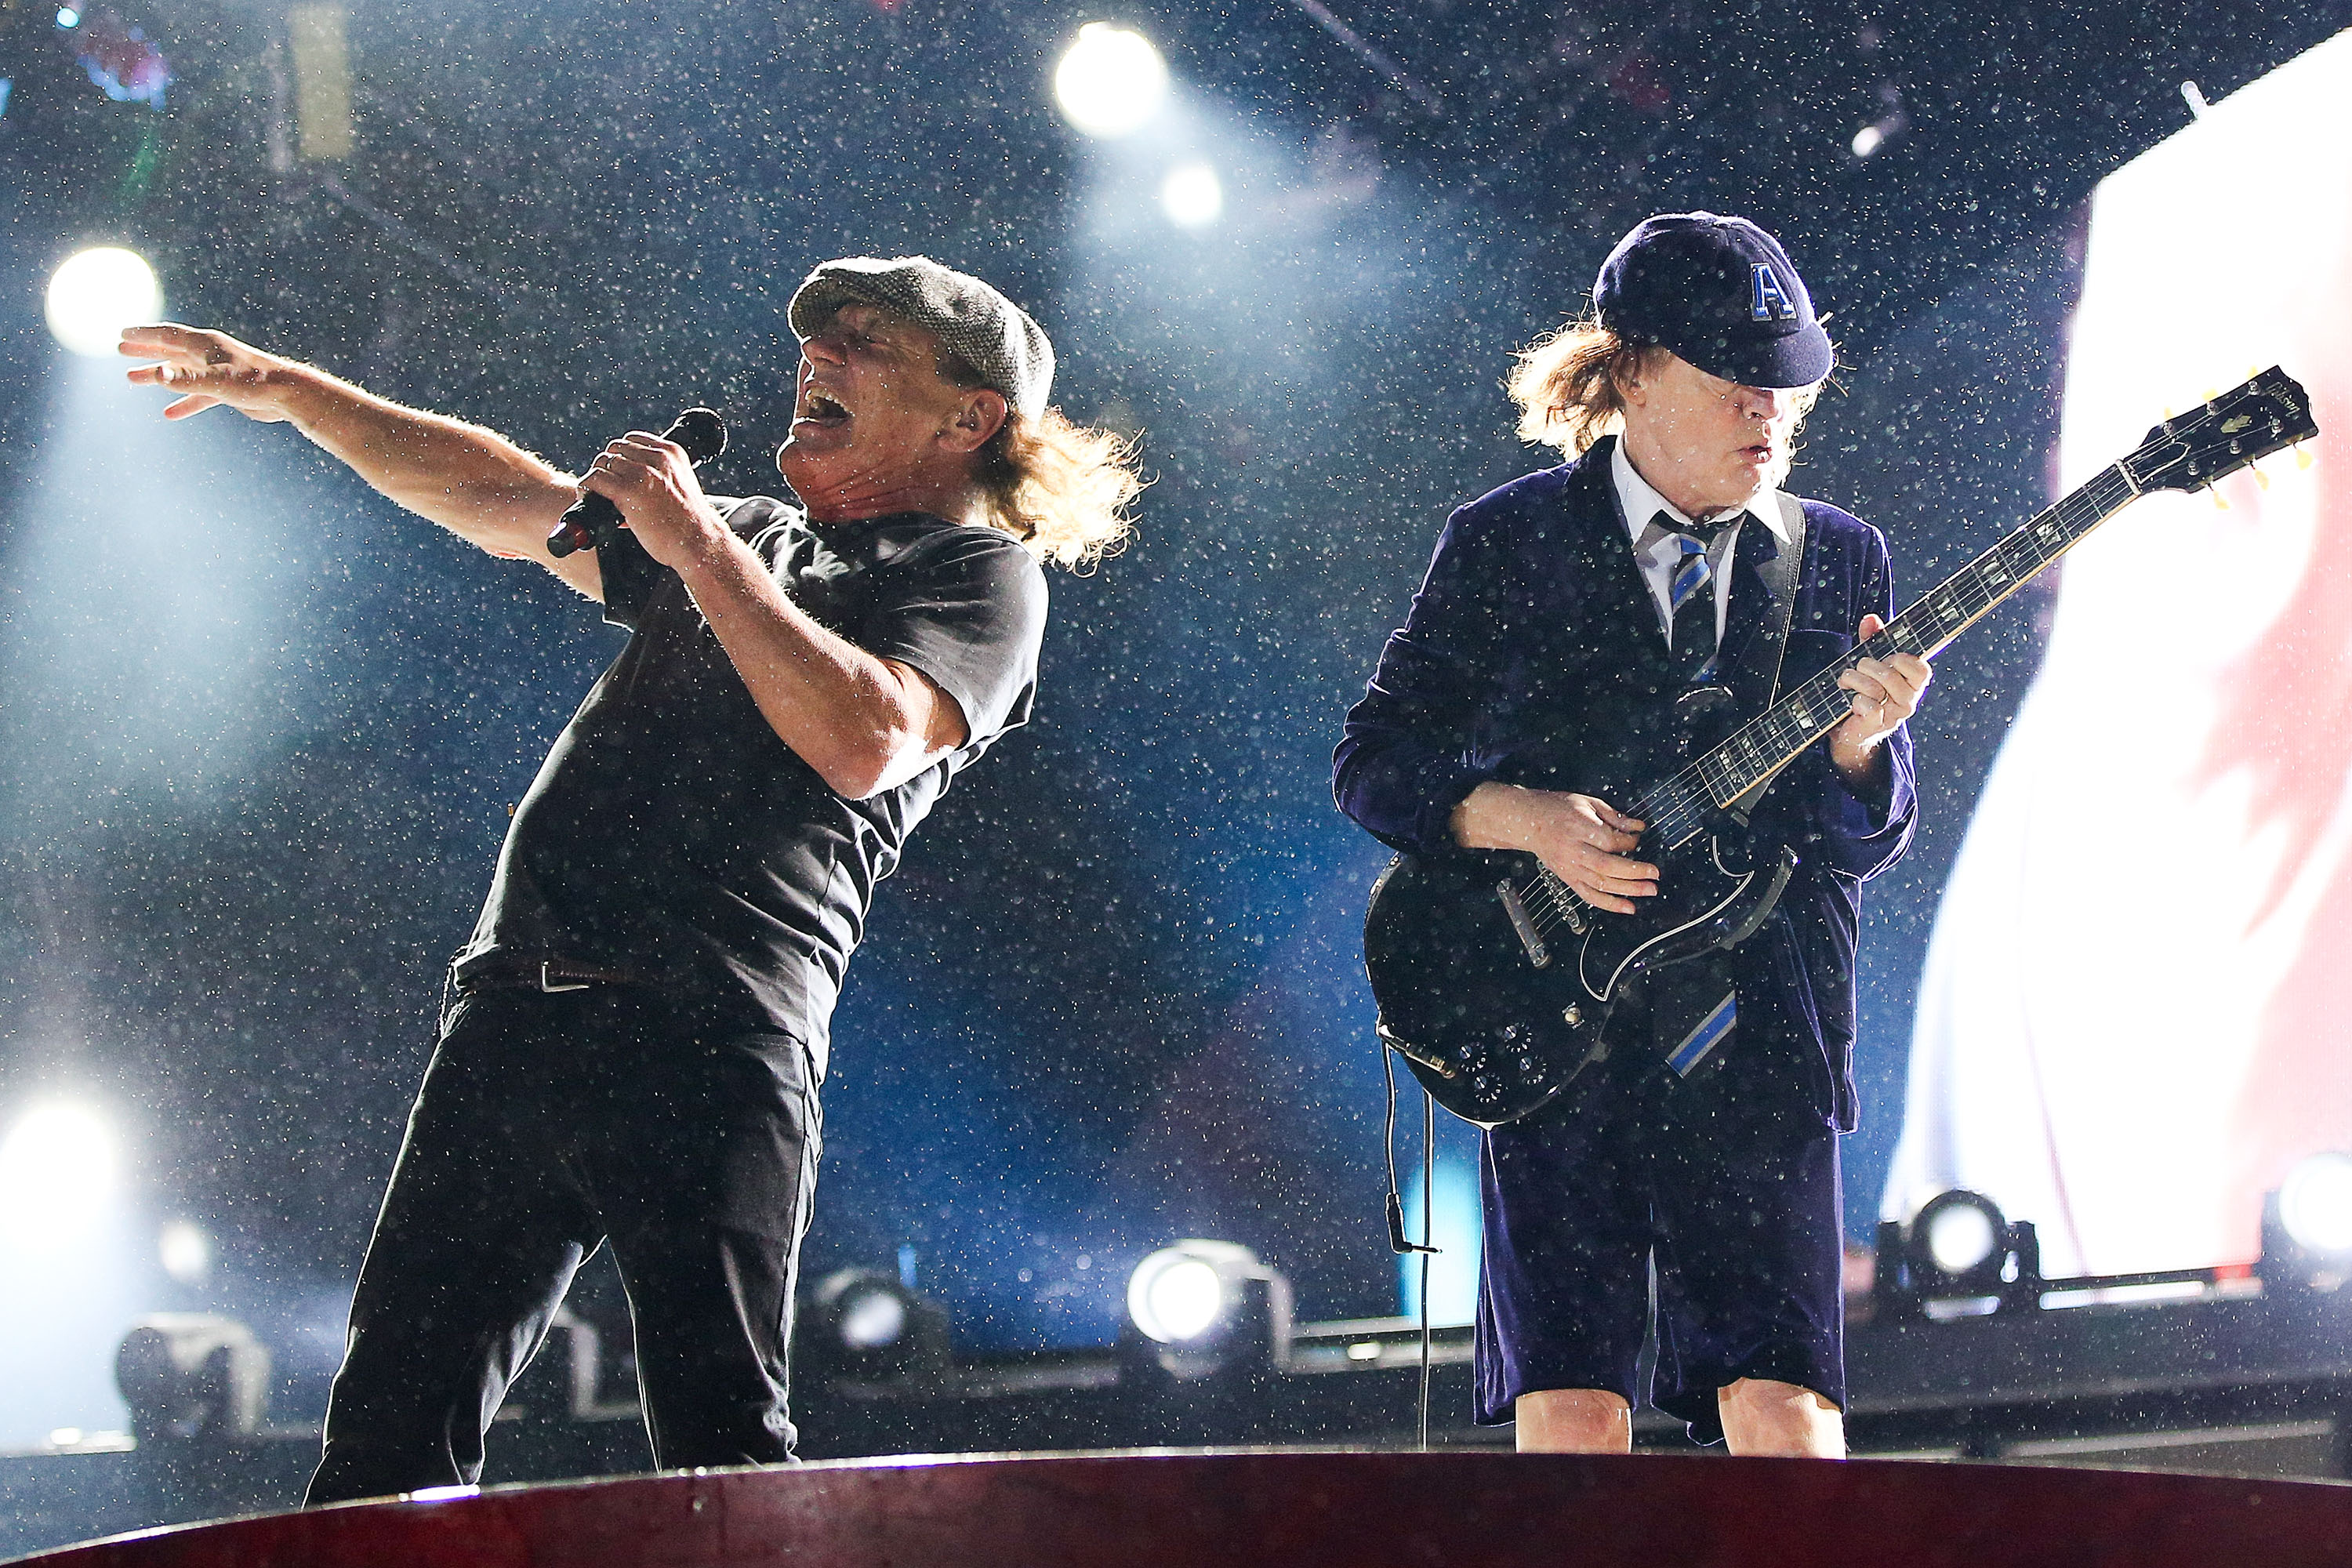 AC/DC Flick the Switch on <i></noscript>
<p><span style=